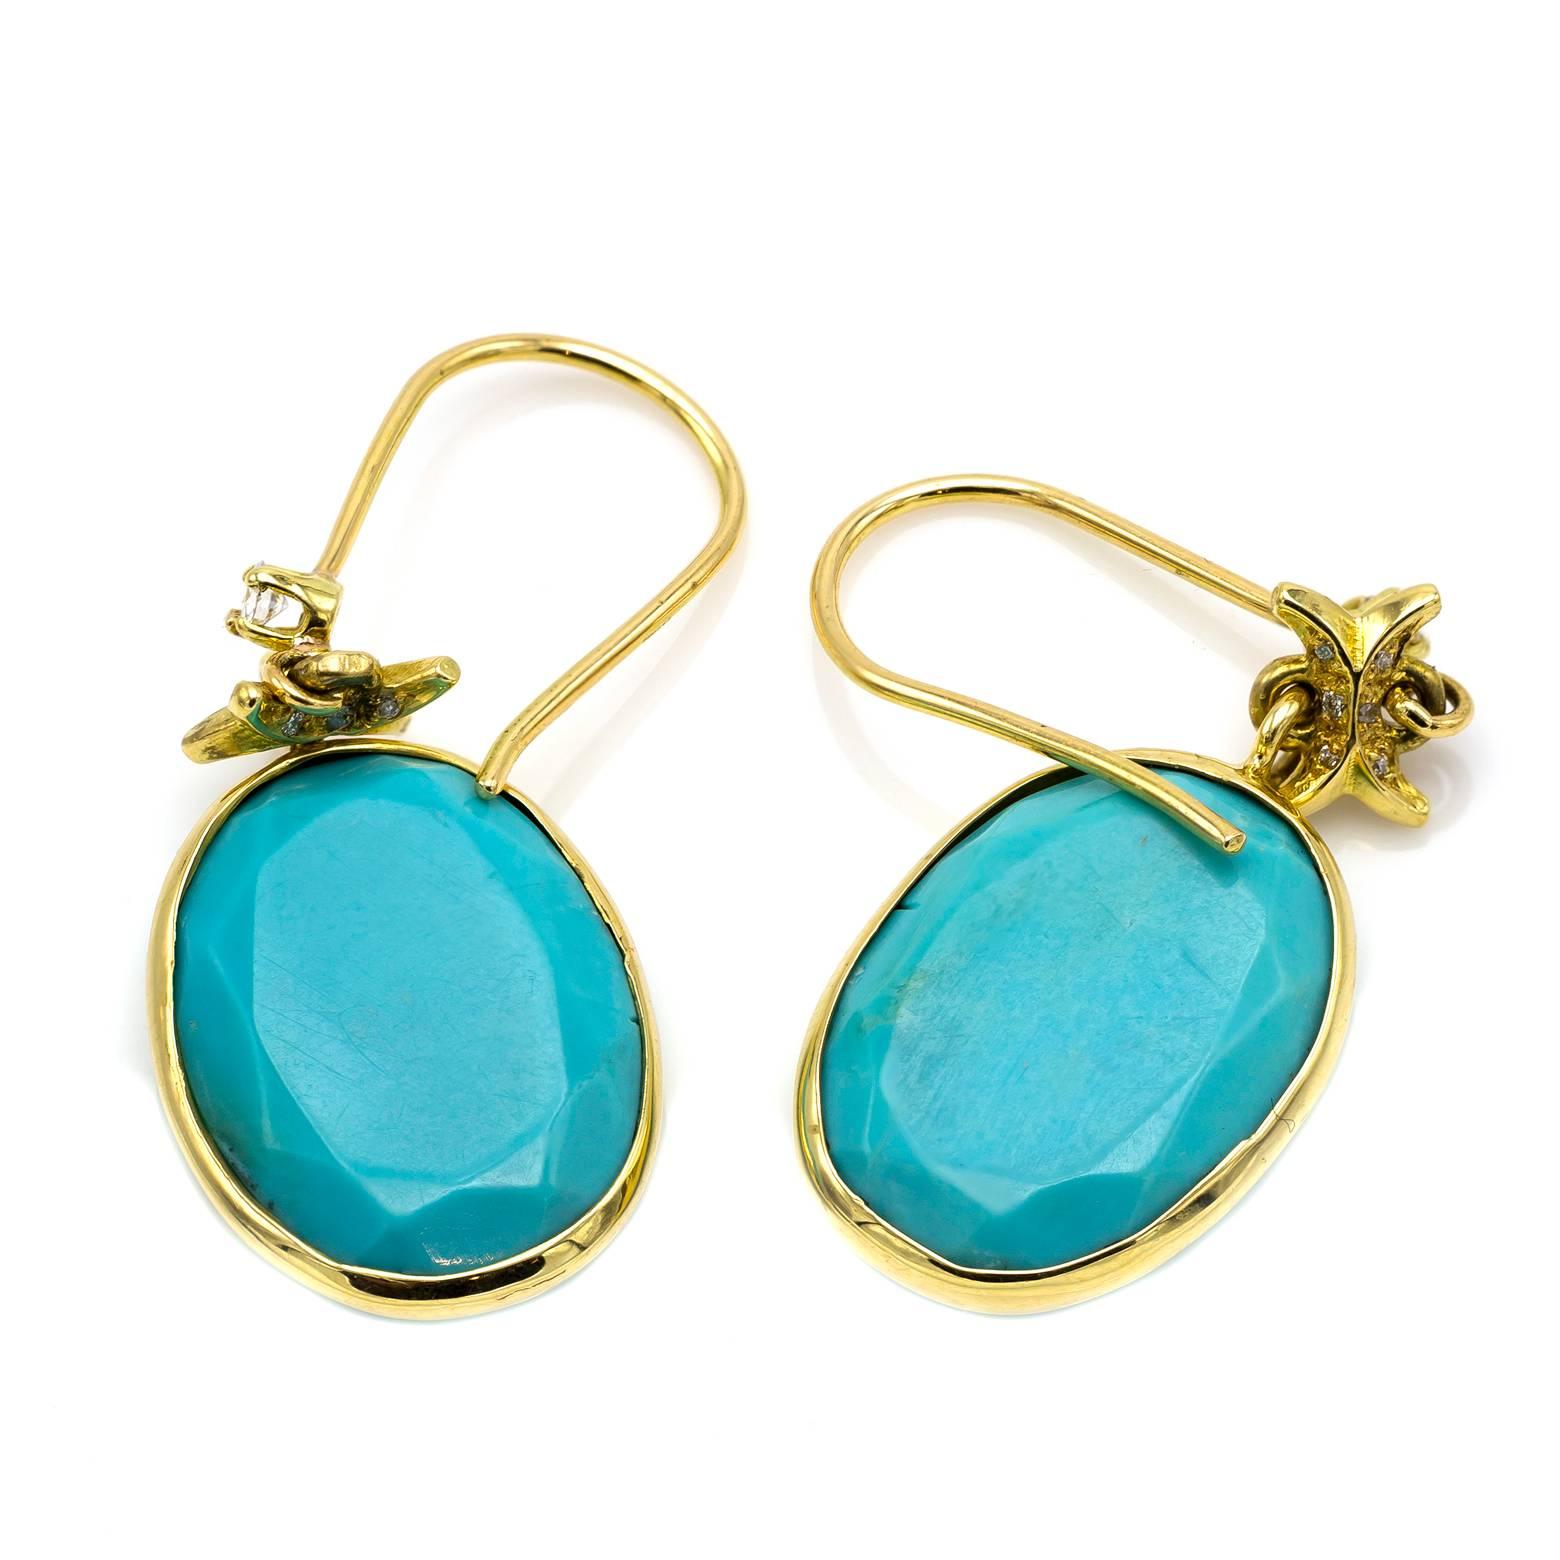 Women's Turquoise and Gold Earrings with Embellished Diamond Accents